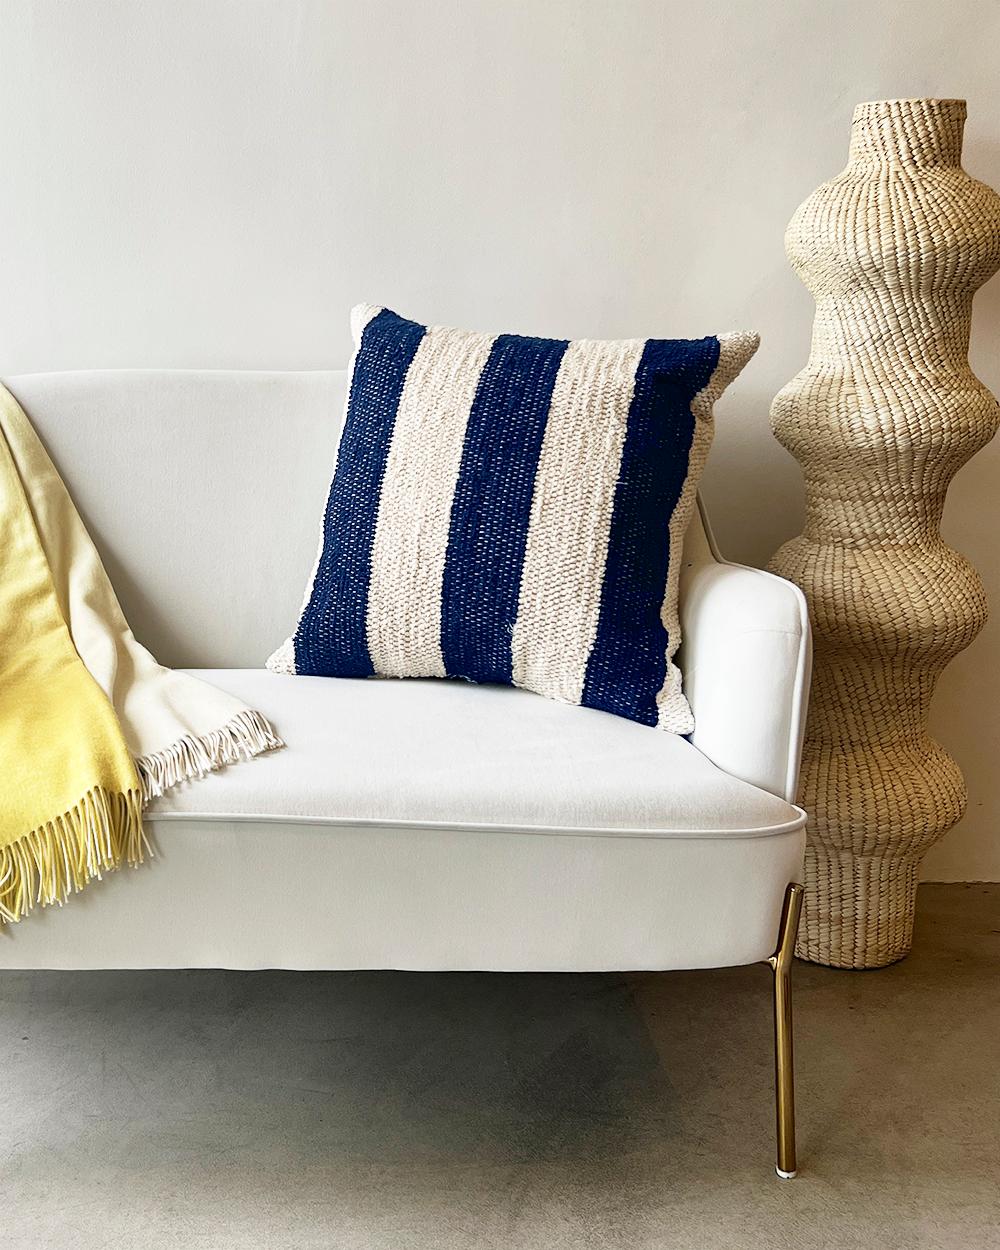 This navy and cream cotton throw pillow is made from thick handwoven cotton and is perfect for a high traffic area like the living room couch. Put two matching pillows on either side of the couch or get multiple patterns in the same color. The